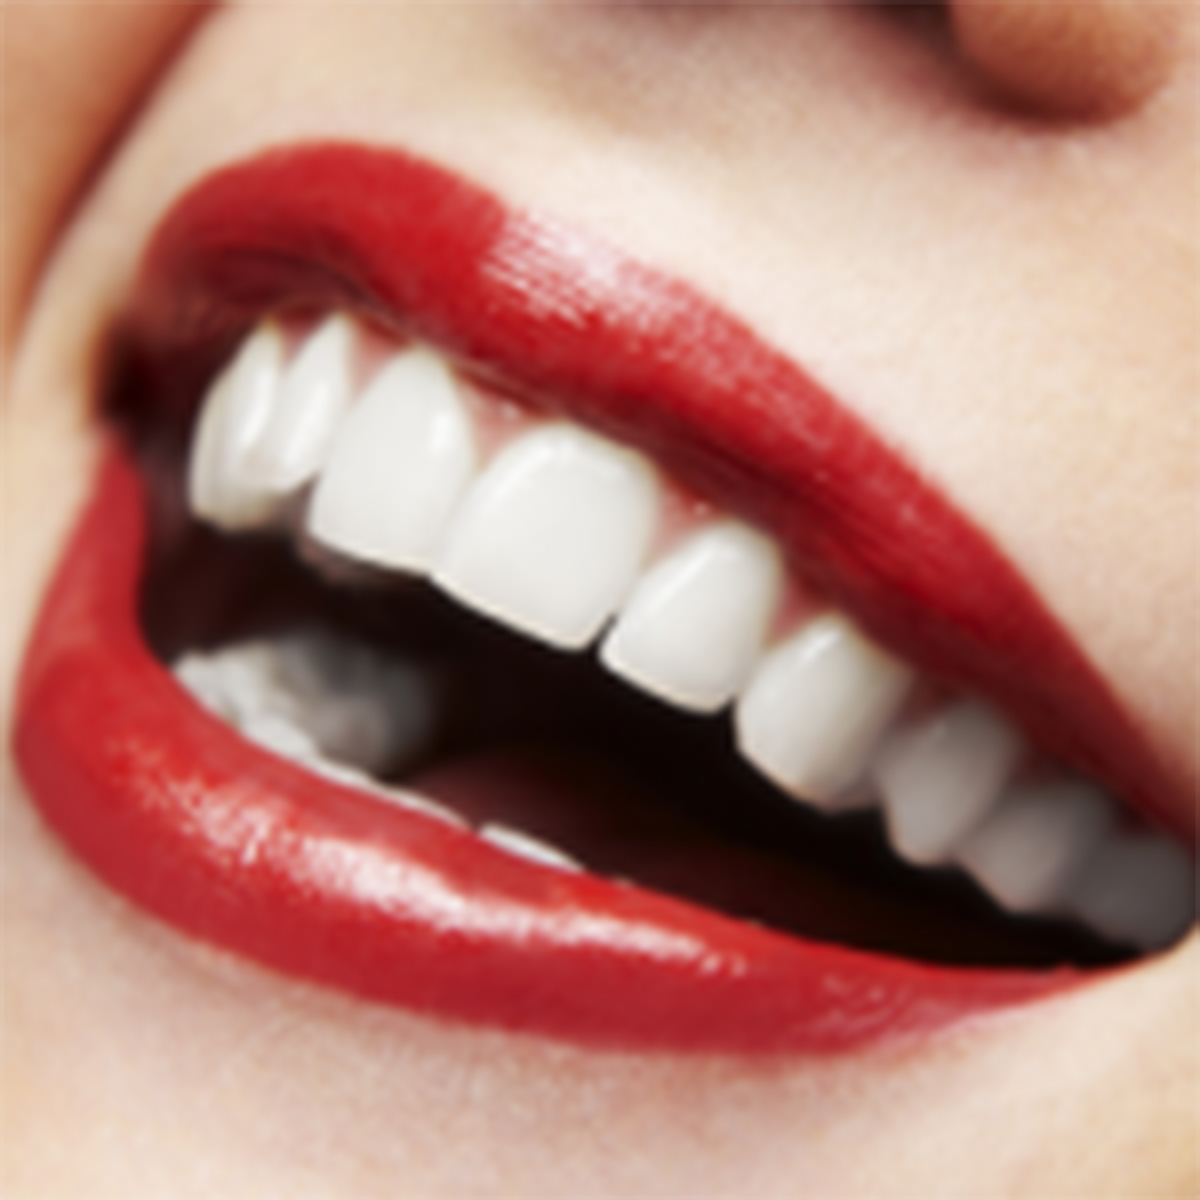 Cosmetic options for the life of your smile